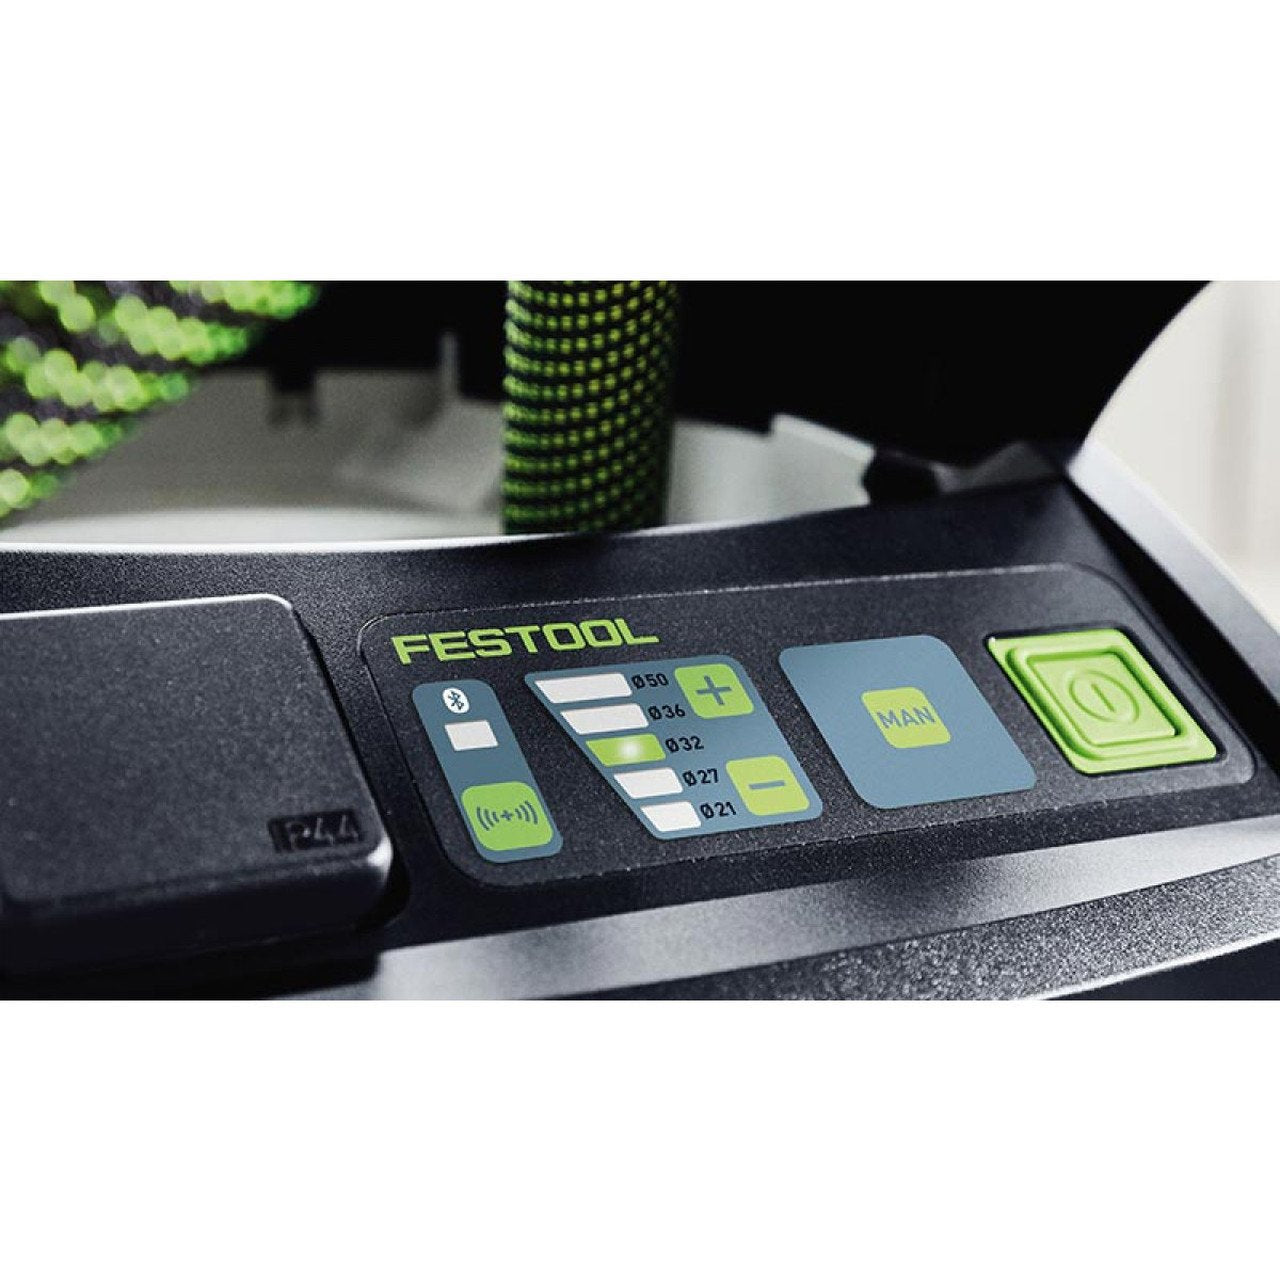 The touch control panel allows adjustments for suction level, power and manual operation, and Bluetooth connectivity.